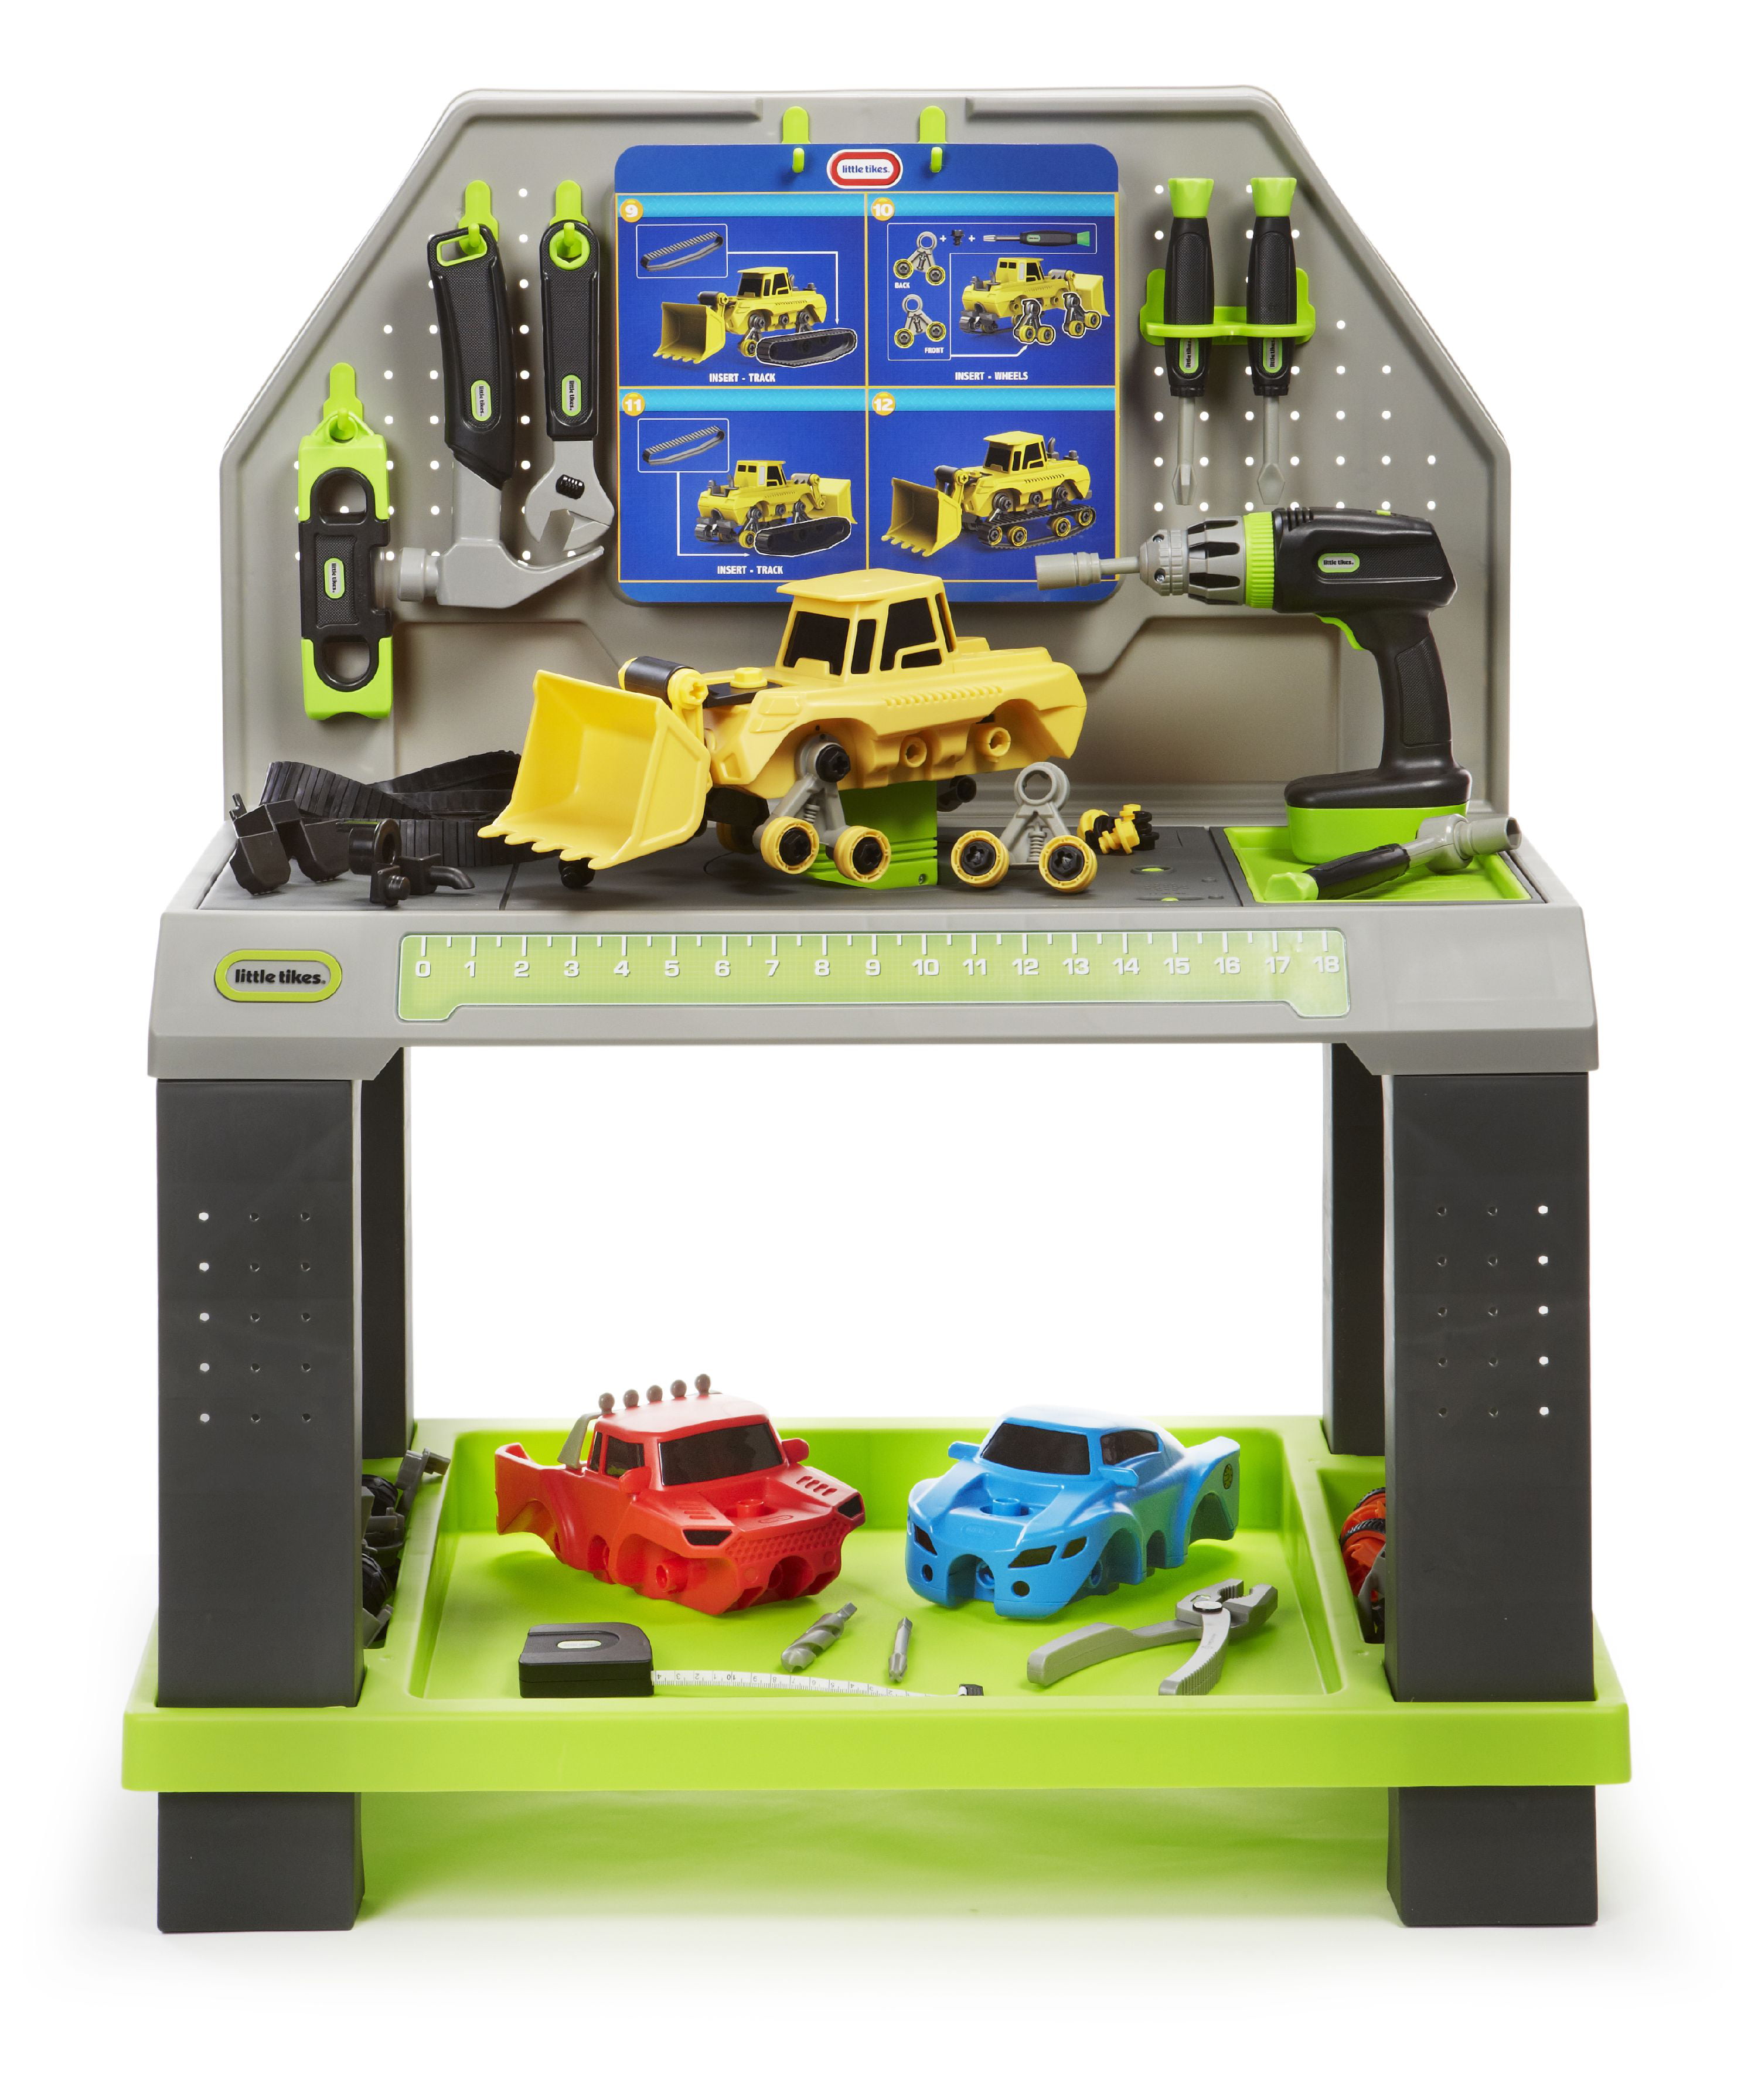 https://www.momjunction.com/wp-content/uploads/product-images/little-tikes-construct-n-learn-smart-workbench_afl384.jpg